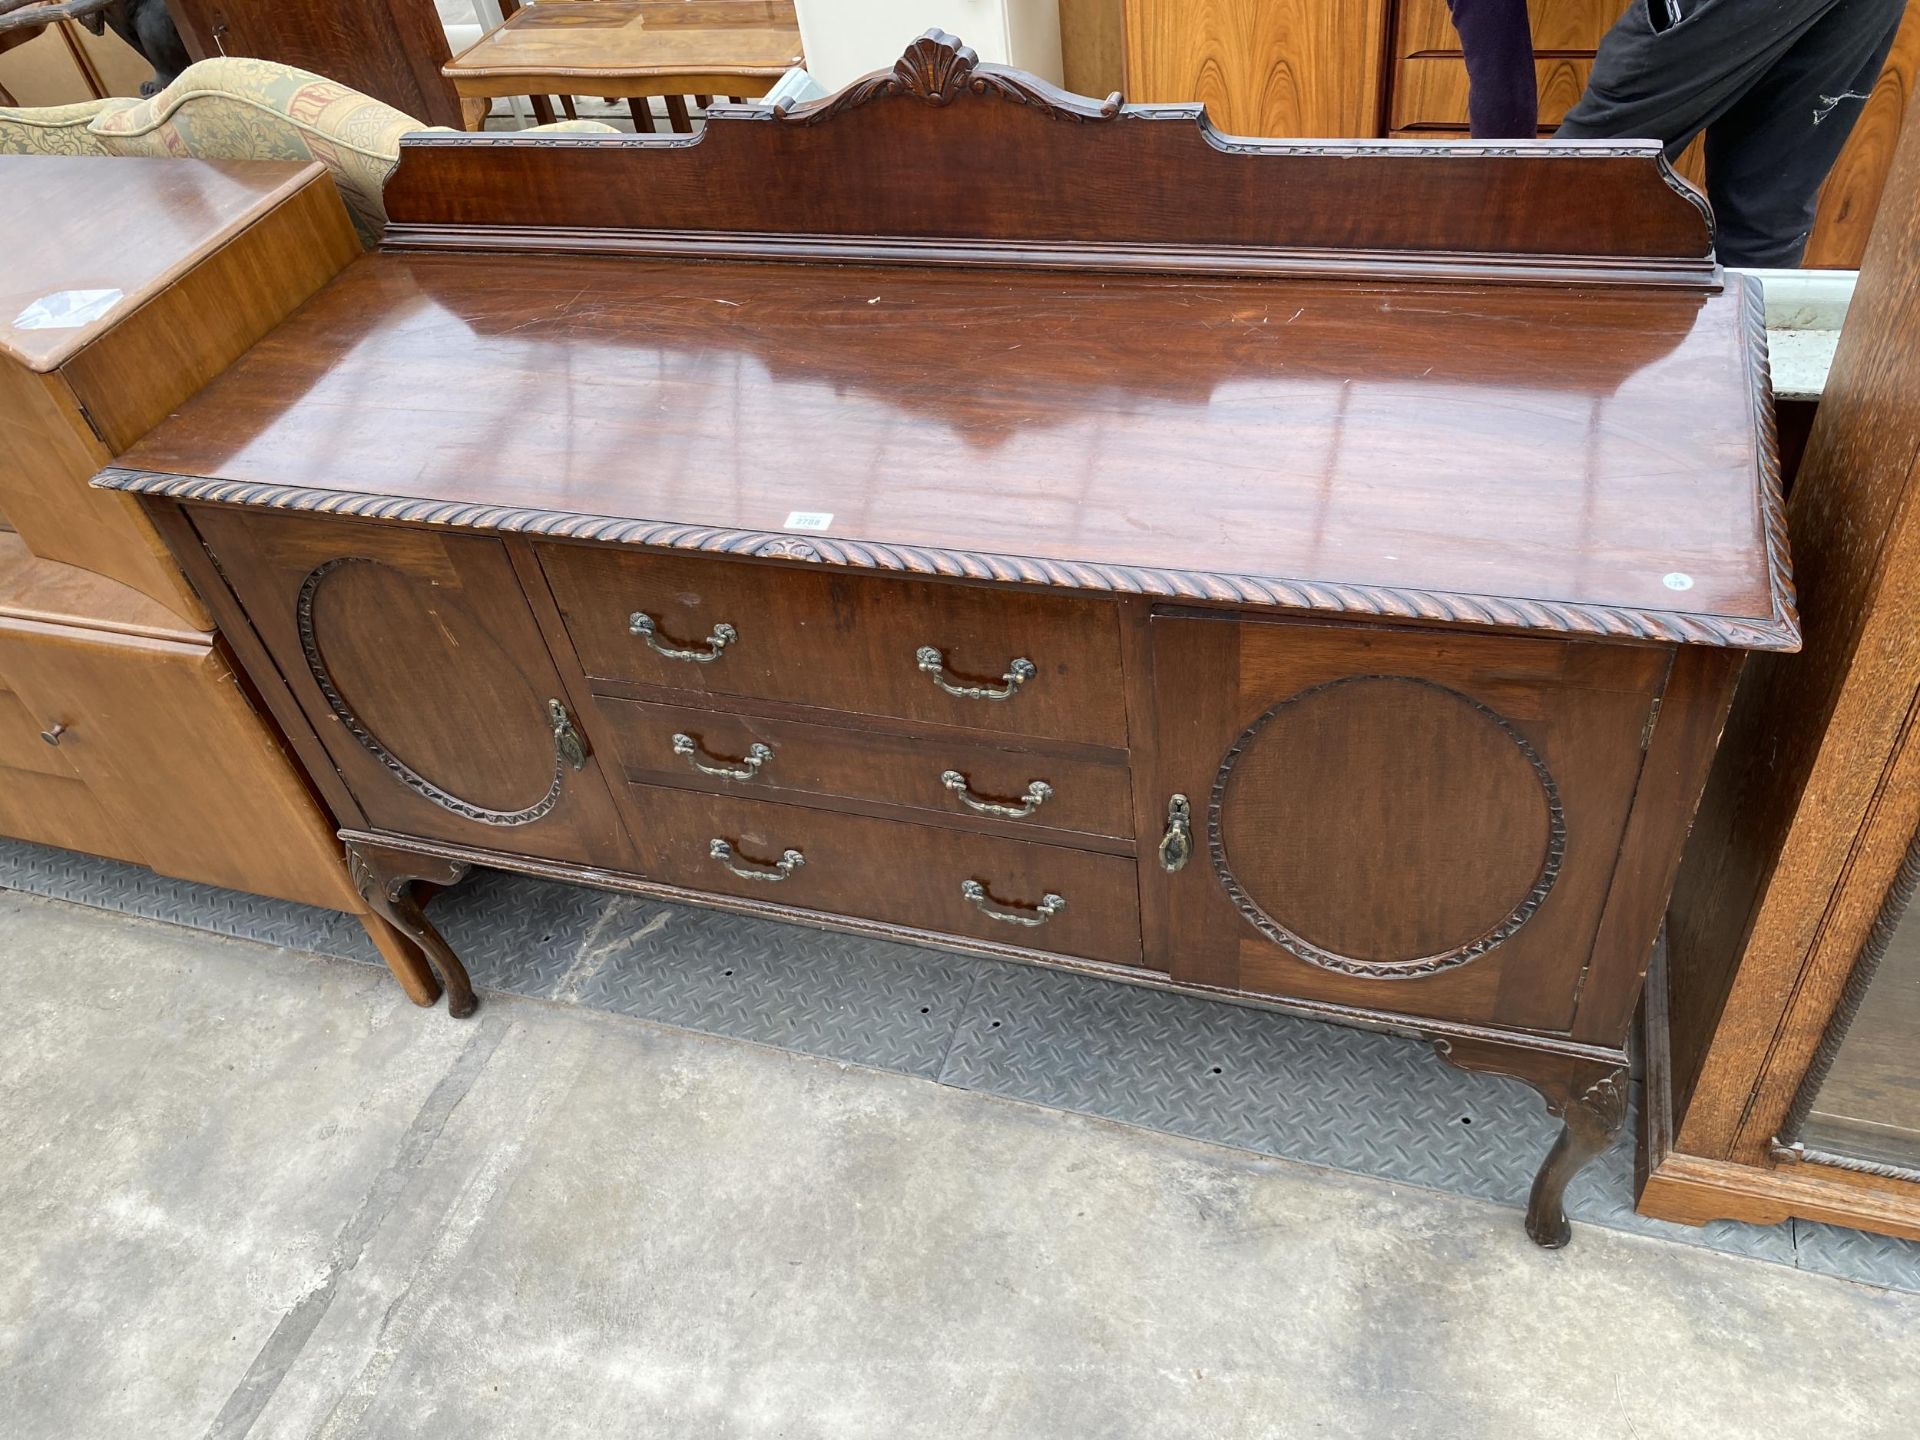 AN EARLY 20TH CENTURY MAHOGANY SIDEBOARD WITH ROPE EDGE ON CABRIOLE LEGS, 60" WIDE